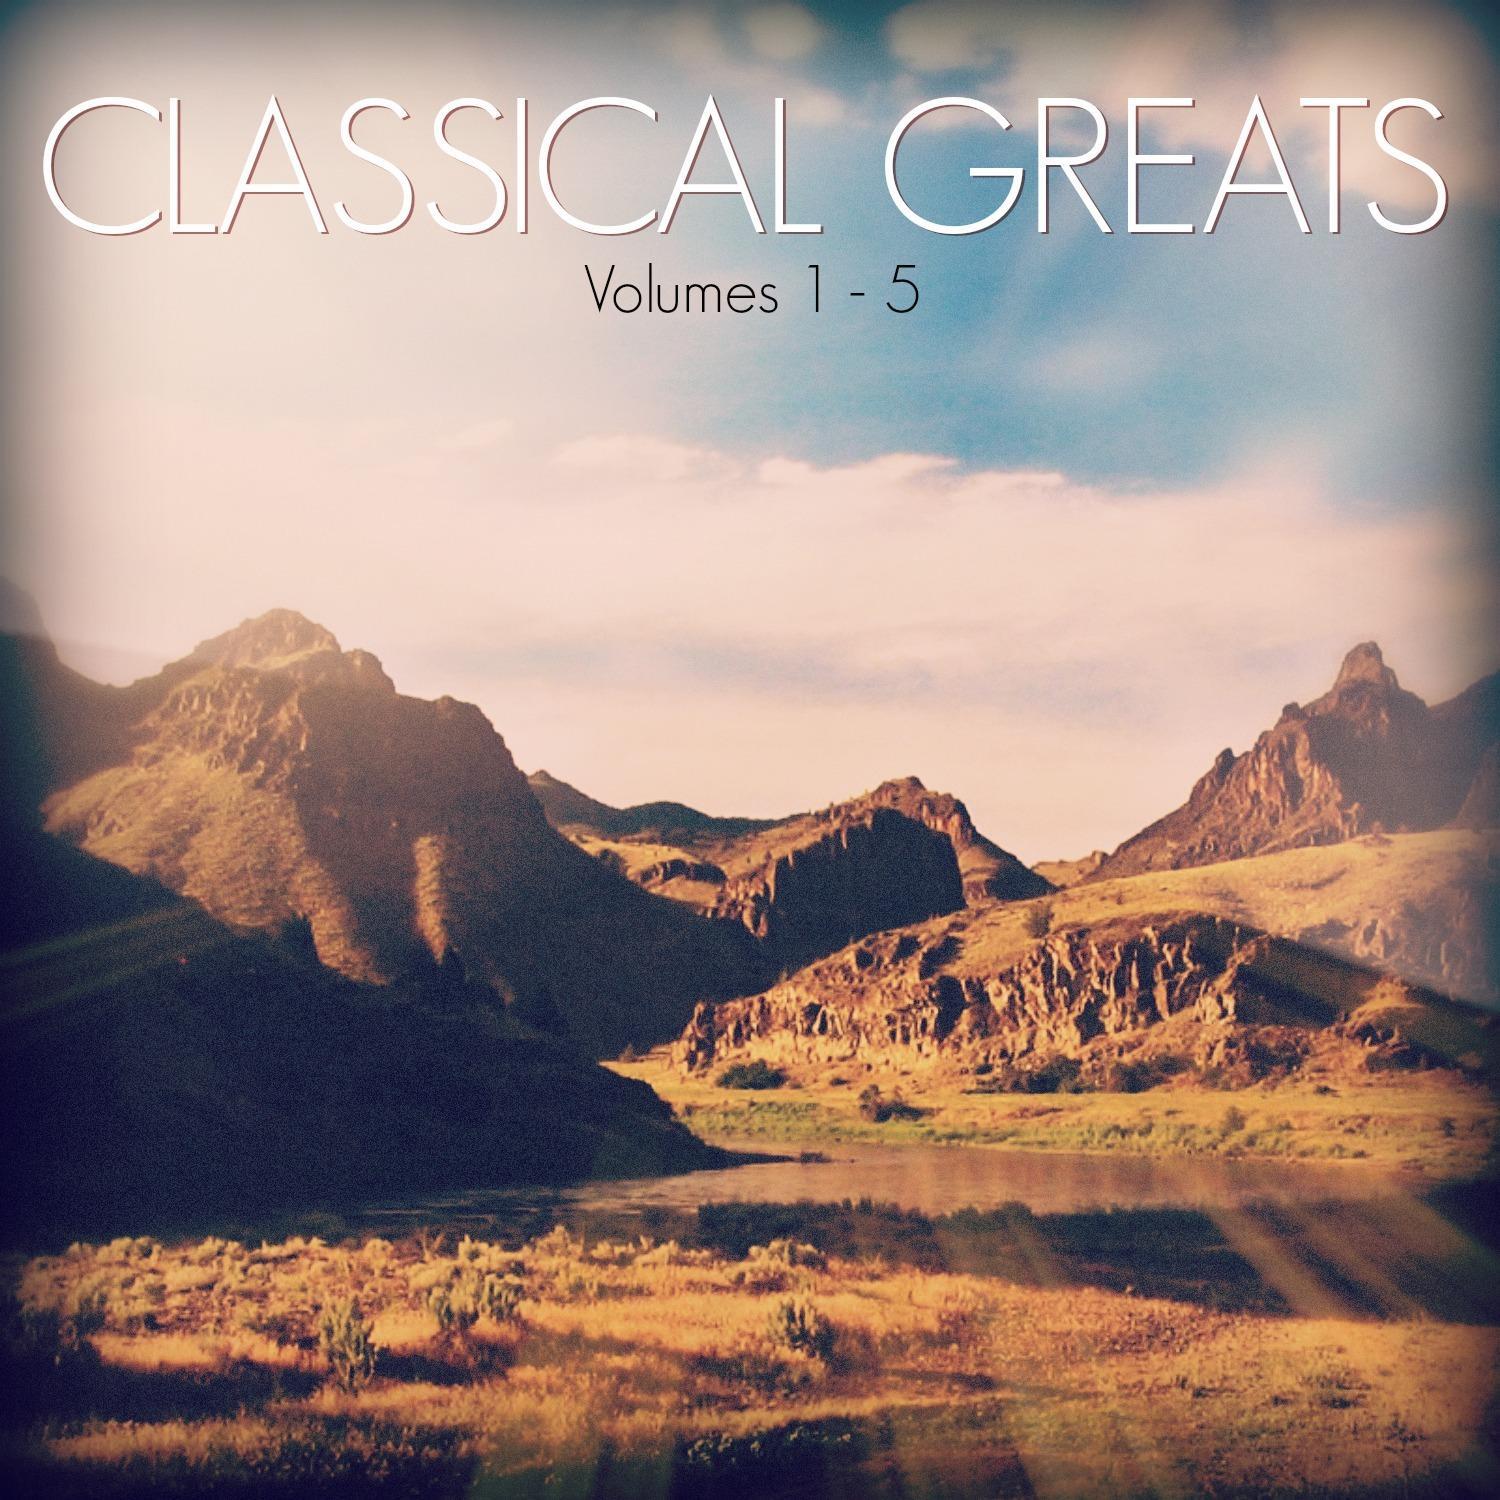 One Hundred Classical Greats: Vol. 1-5